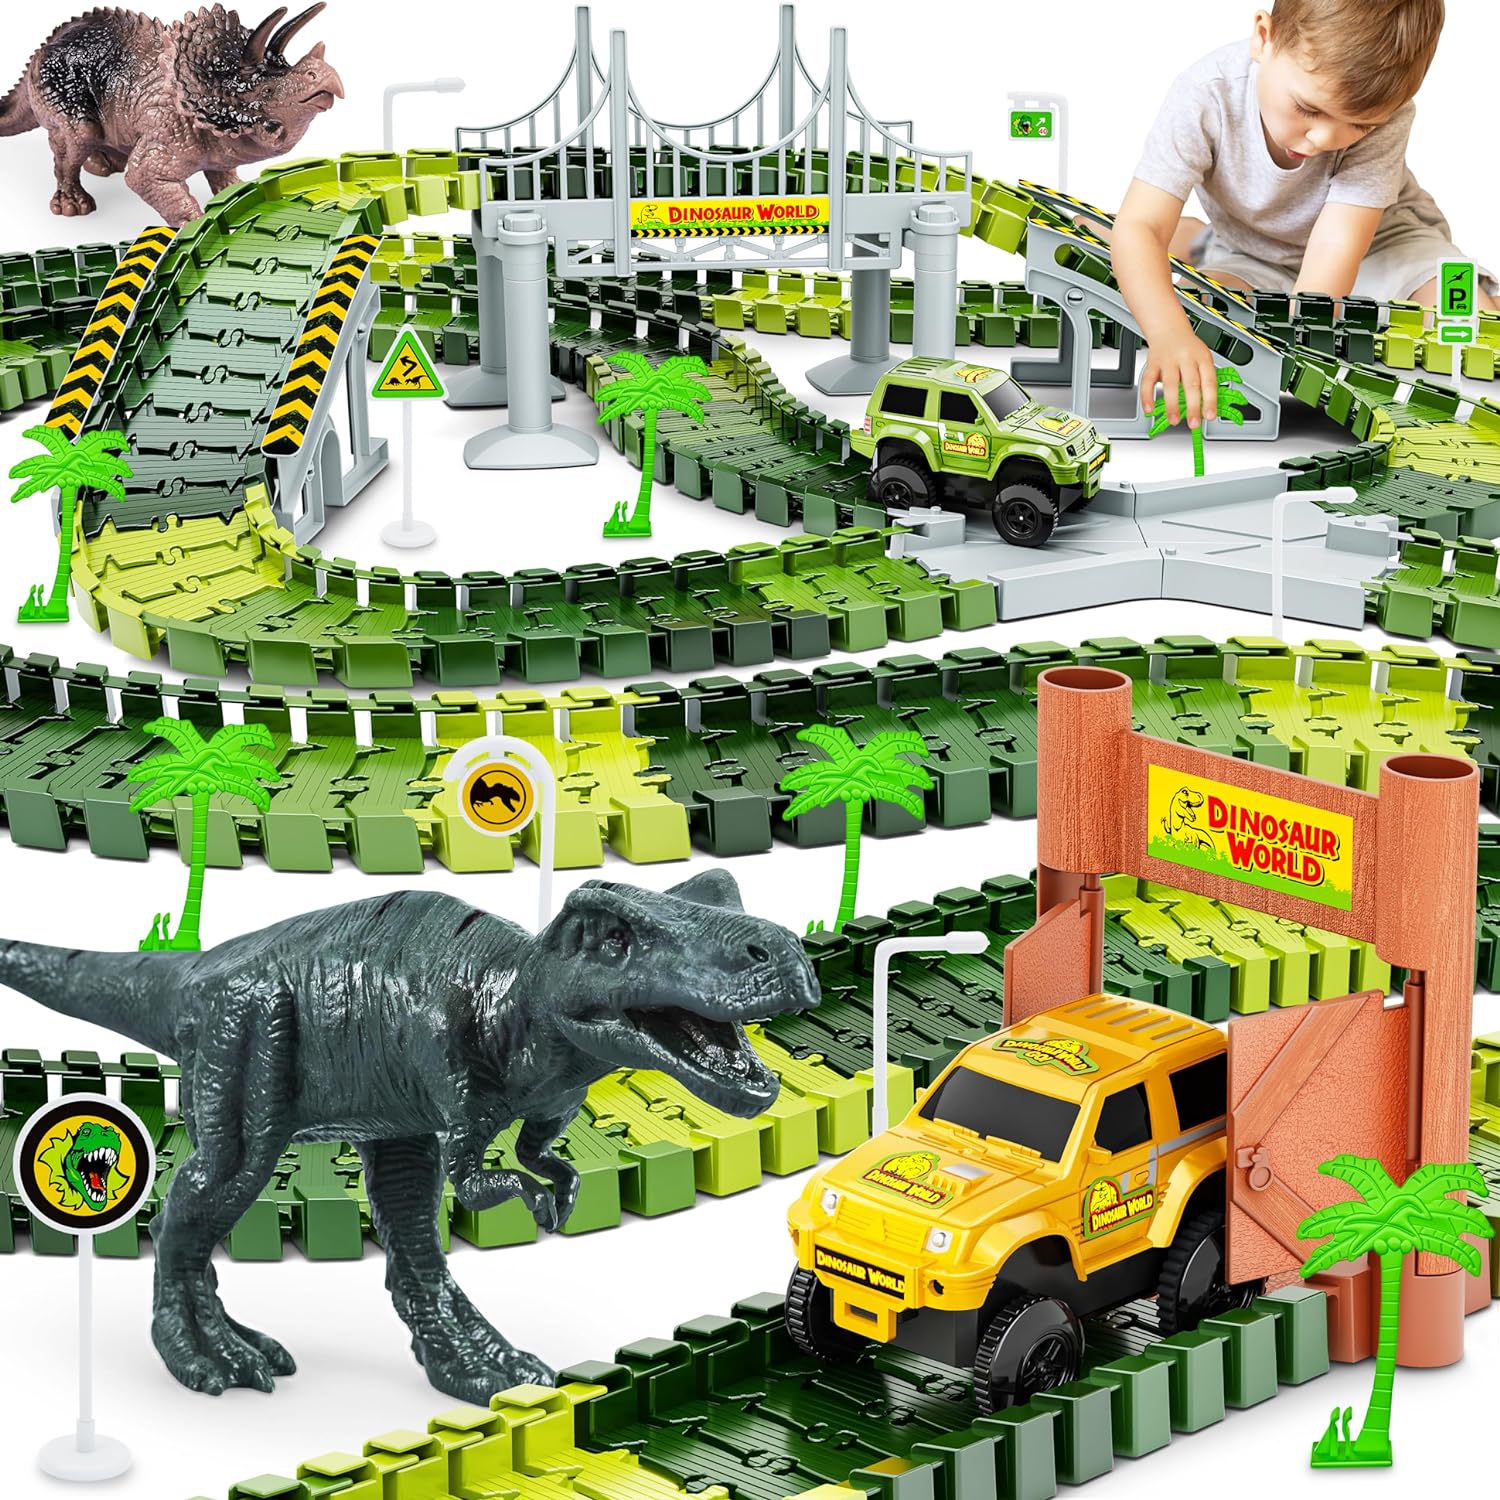 Rating: The Dinosaur Tracks Flexible Train Tracks Set is an exciting and imaginative toy that transports kids into a world of prehistoric adventure.Pros: 1. Endless Creativity: This set includes 185 pieces that kids can use to create their very own dinosaur world road race. The flexible tracks allow for endless layout possibilities, encouraging creativity and imaginative play. 2. Dinosaur Cars: The set comes with 2 cool dinosaur cars, adding an extra element of fun to the play. These cars c